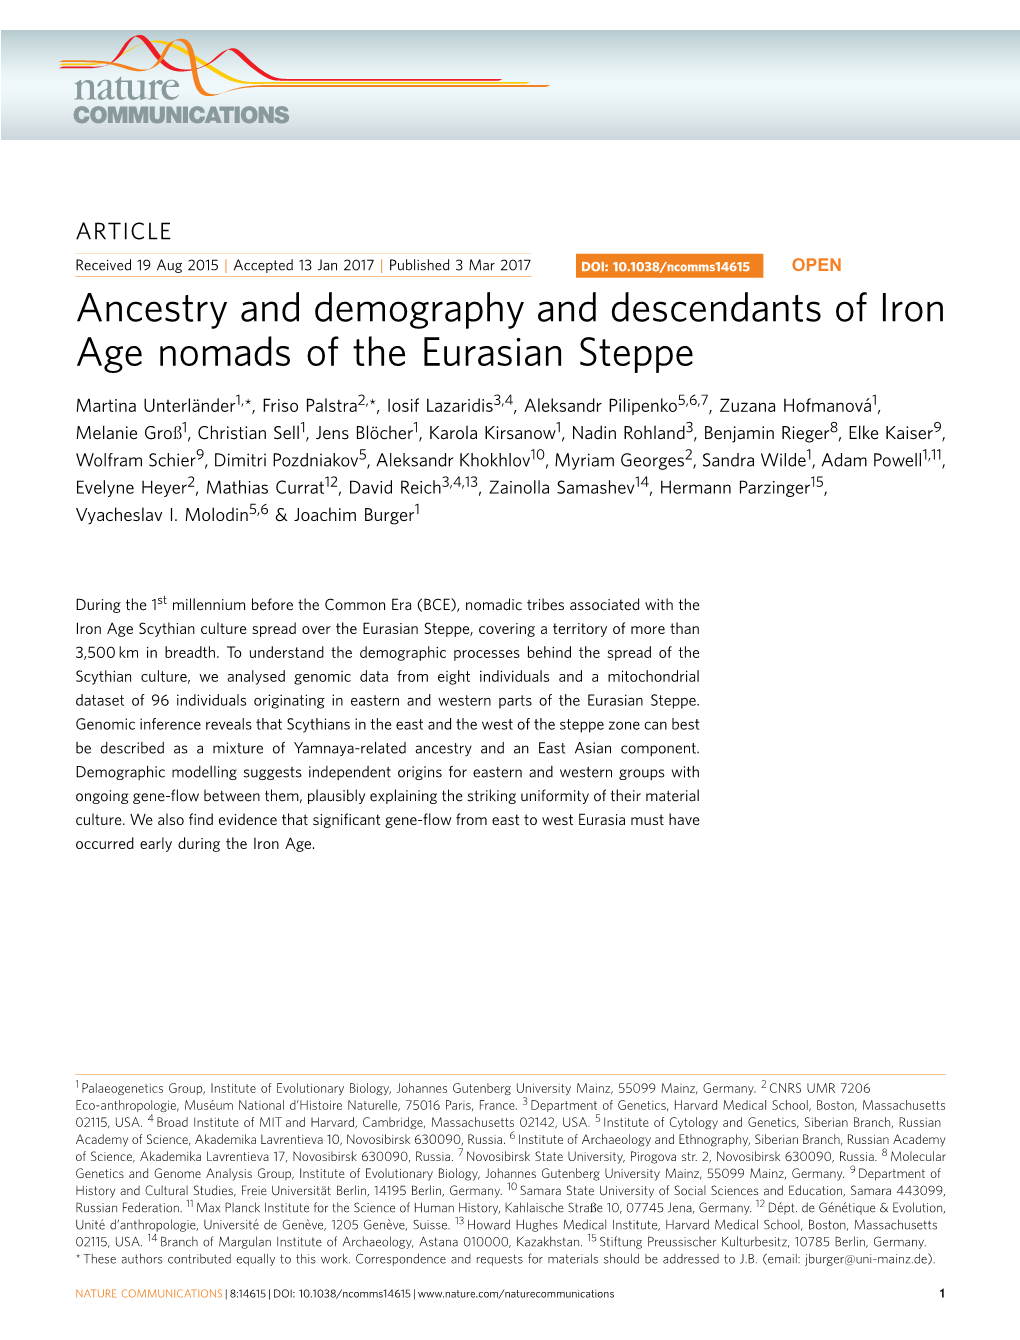 Ancestry and Demography and Descendants of Iron Age Nomads of the Eurasian Steppe